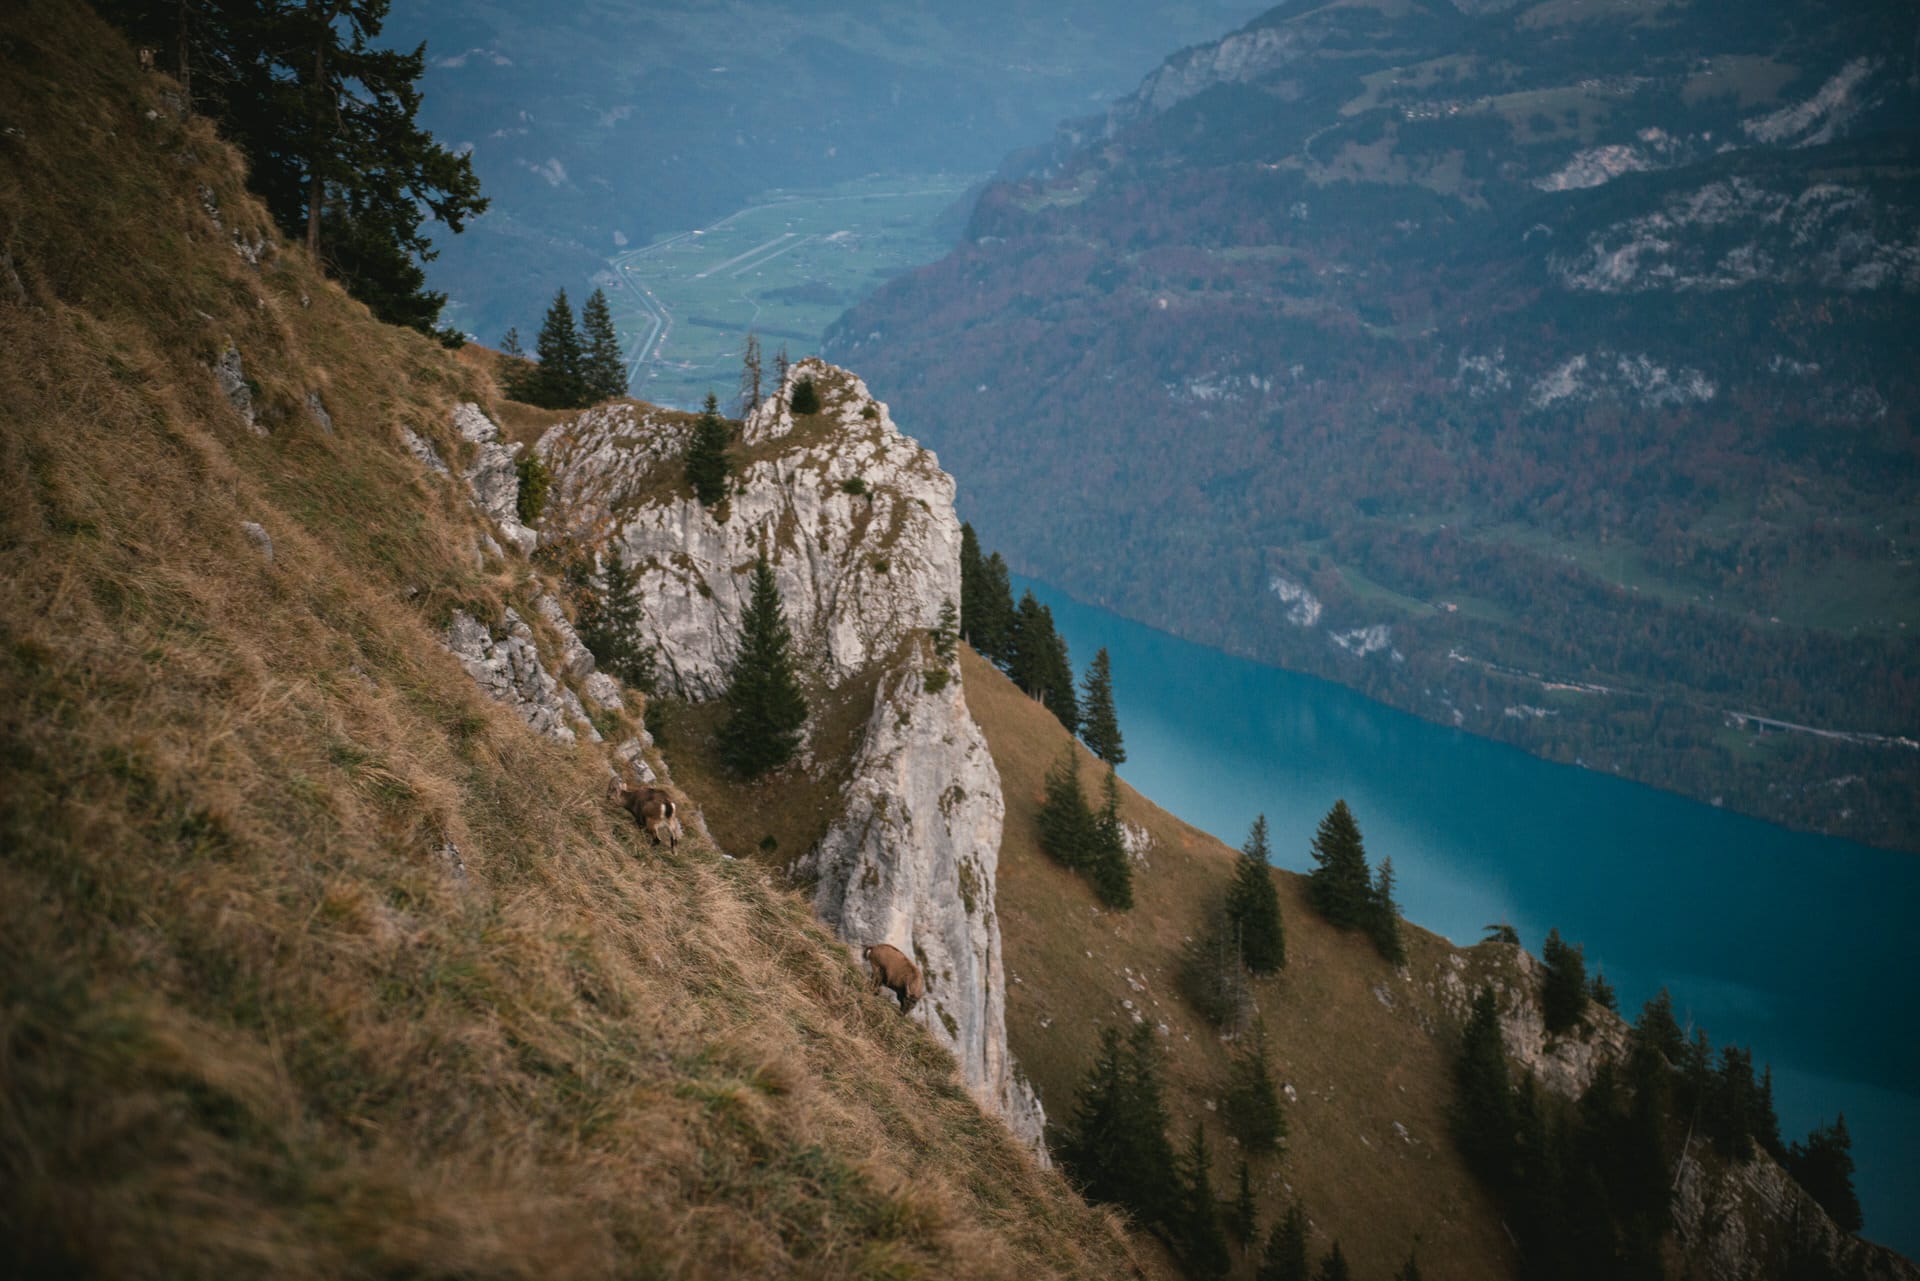 View on lake Brienz from Augstmatthorn